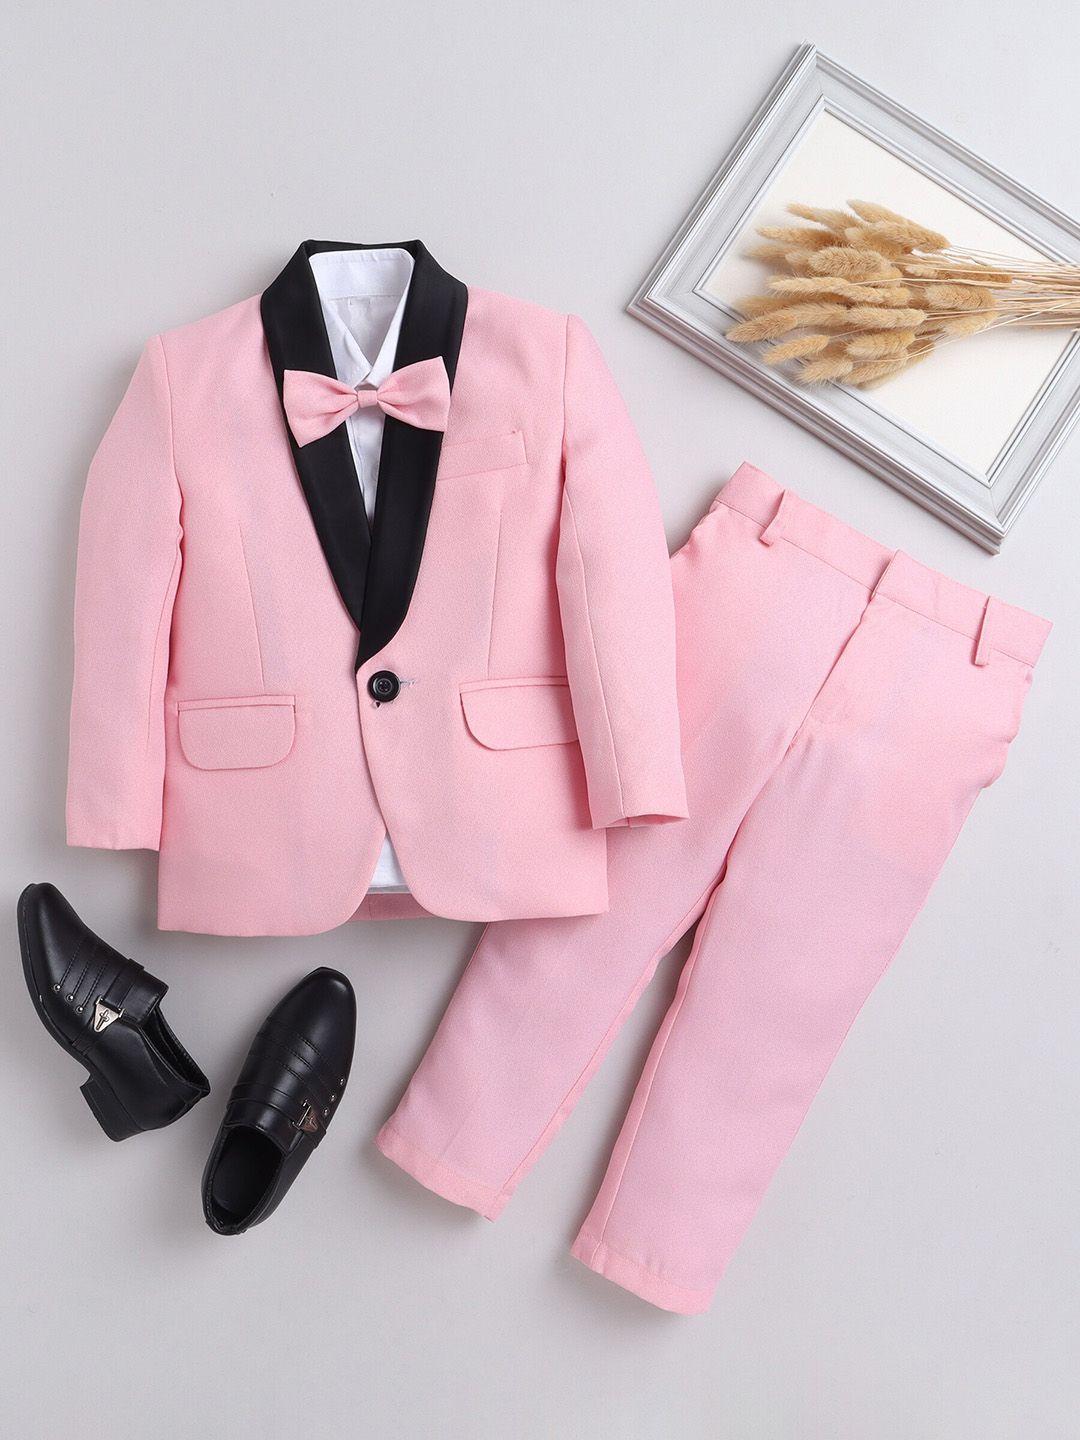 jeetethnics boys single-breasted 5 piece party suits